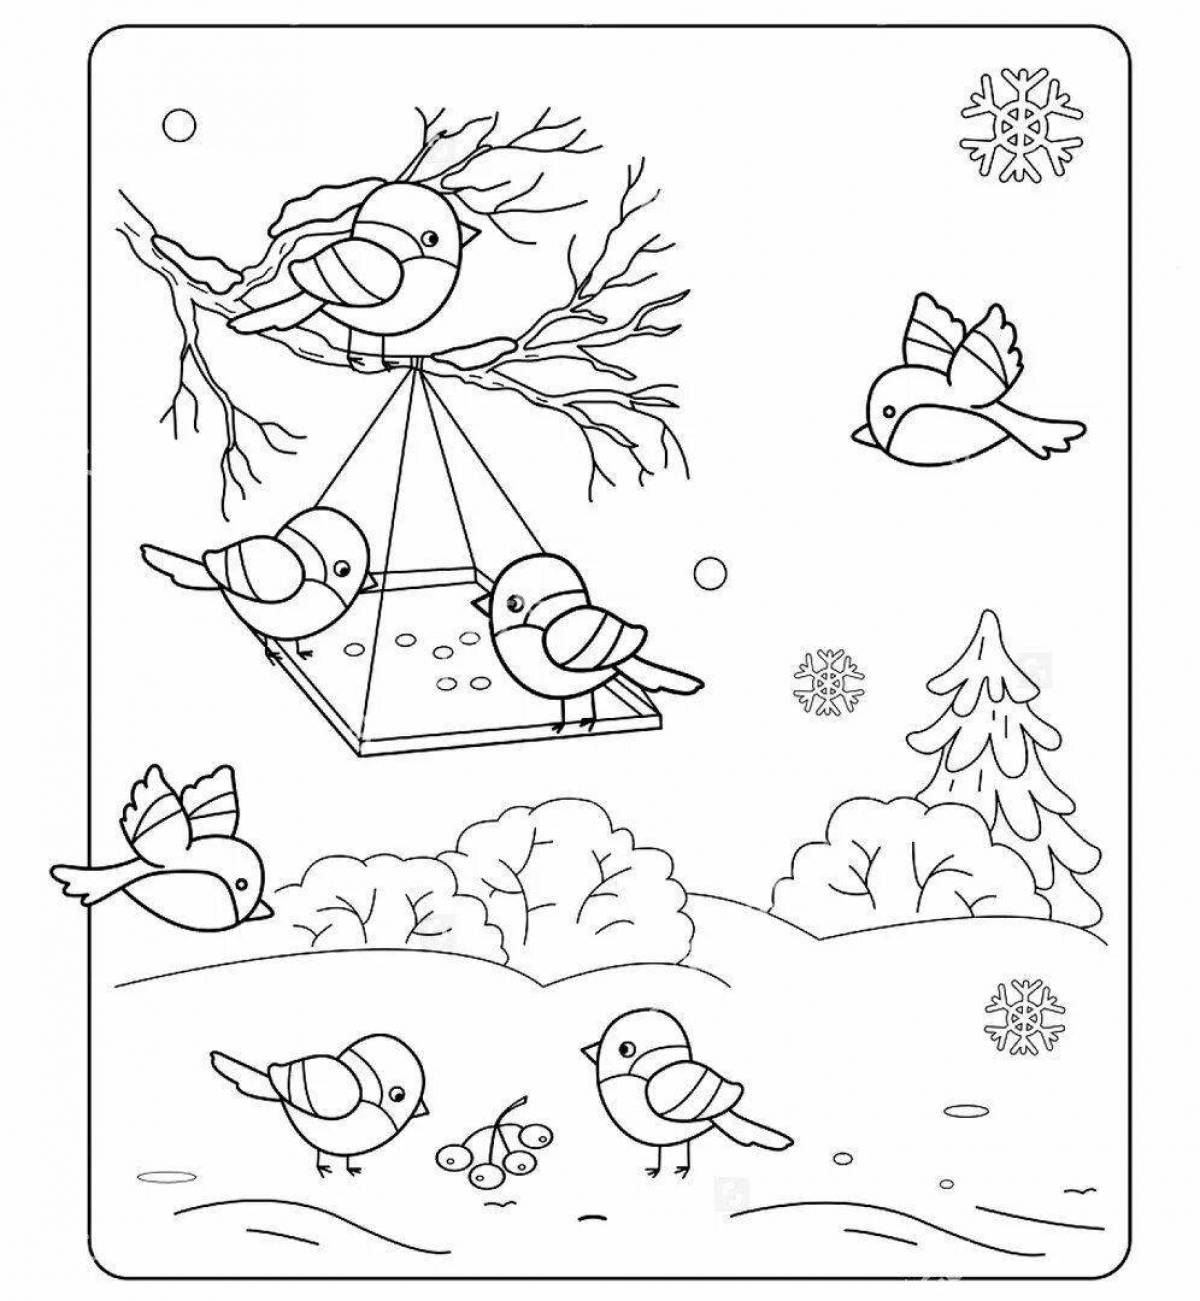 Coloring pages of joyful winter birds for children 3-4 years old